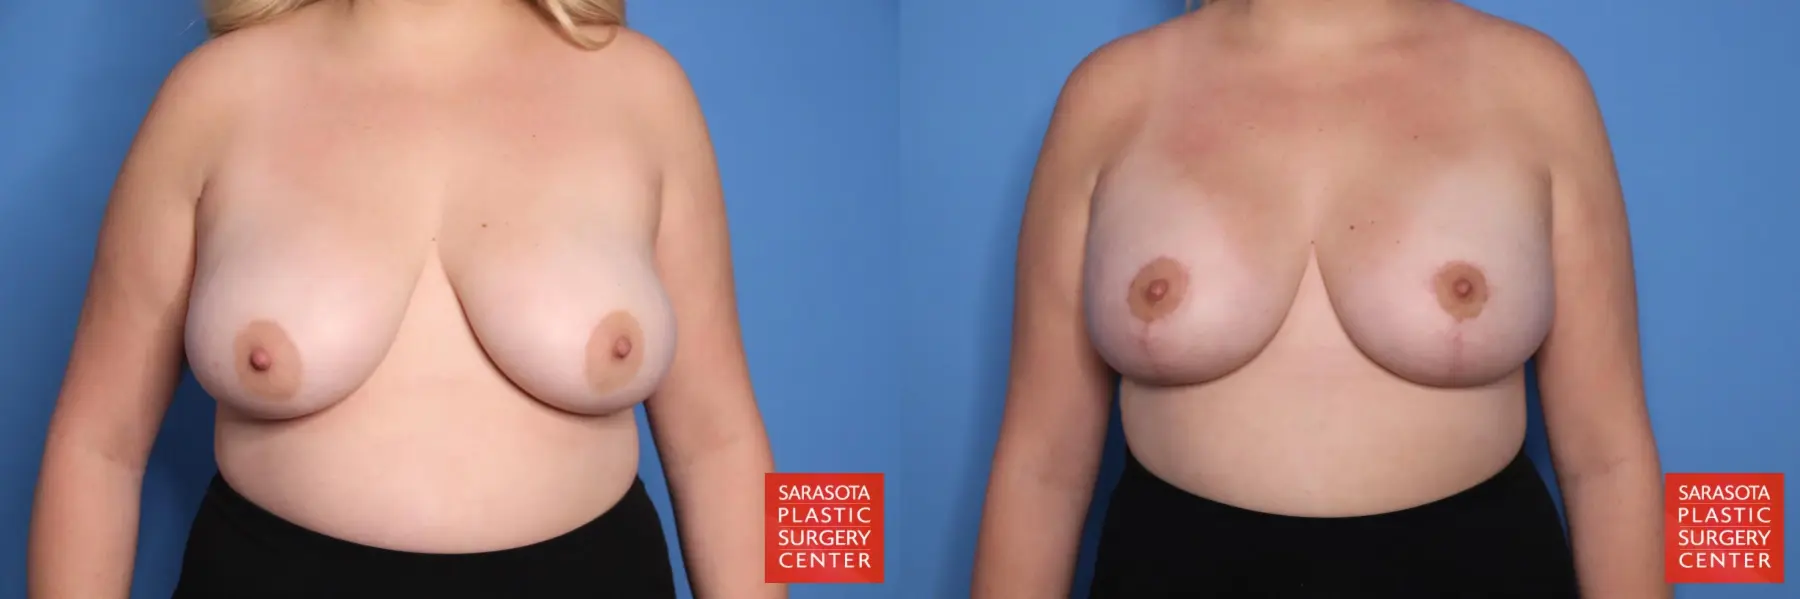 Breast Augmentation With Reduction: Patient 1 - Before and After  